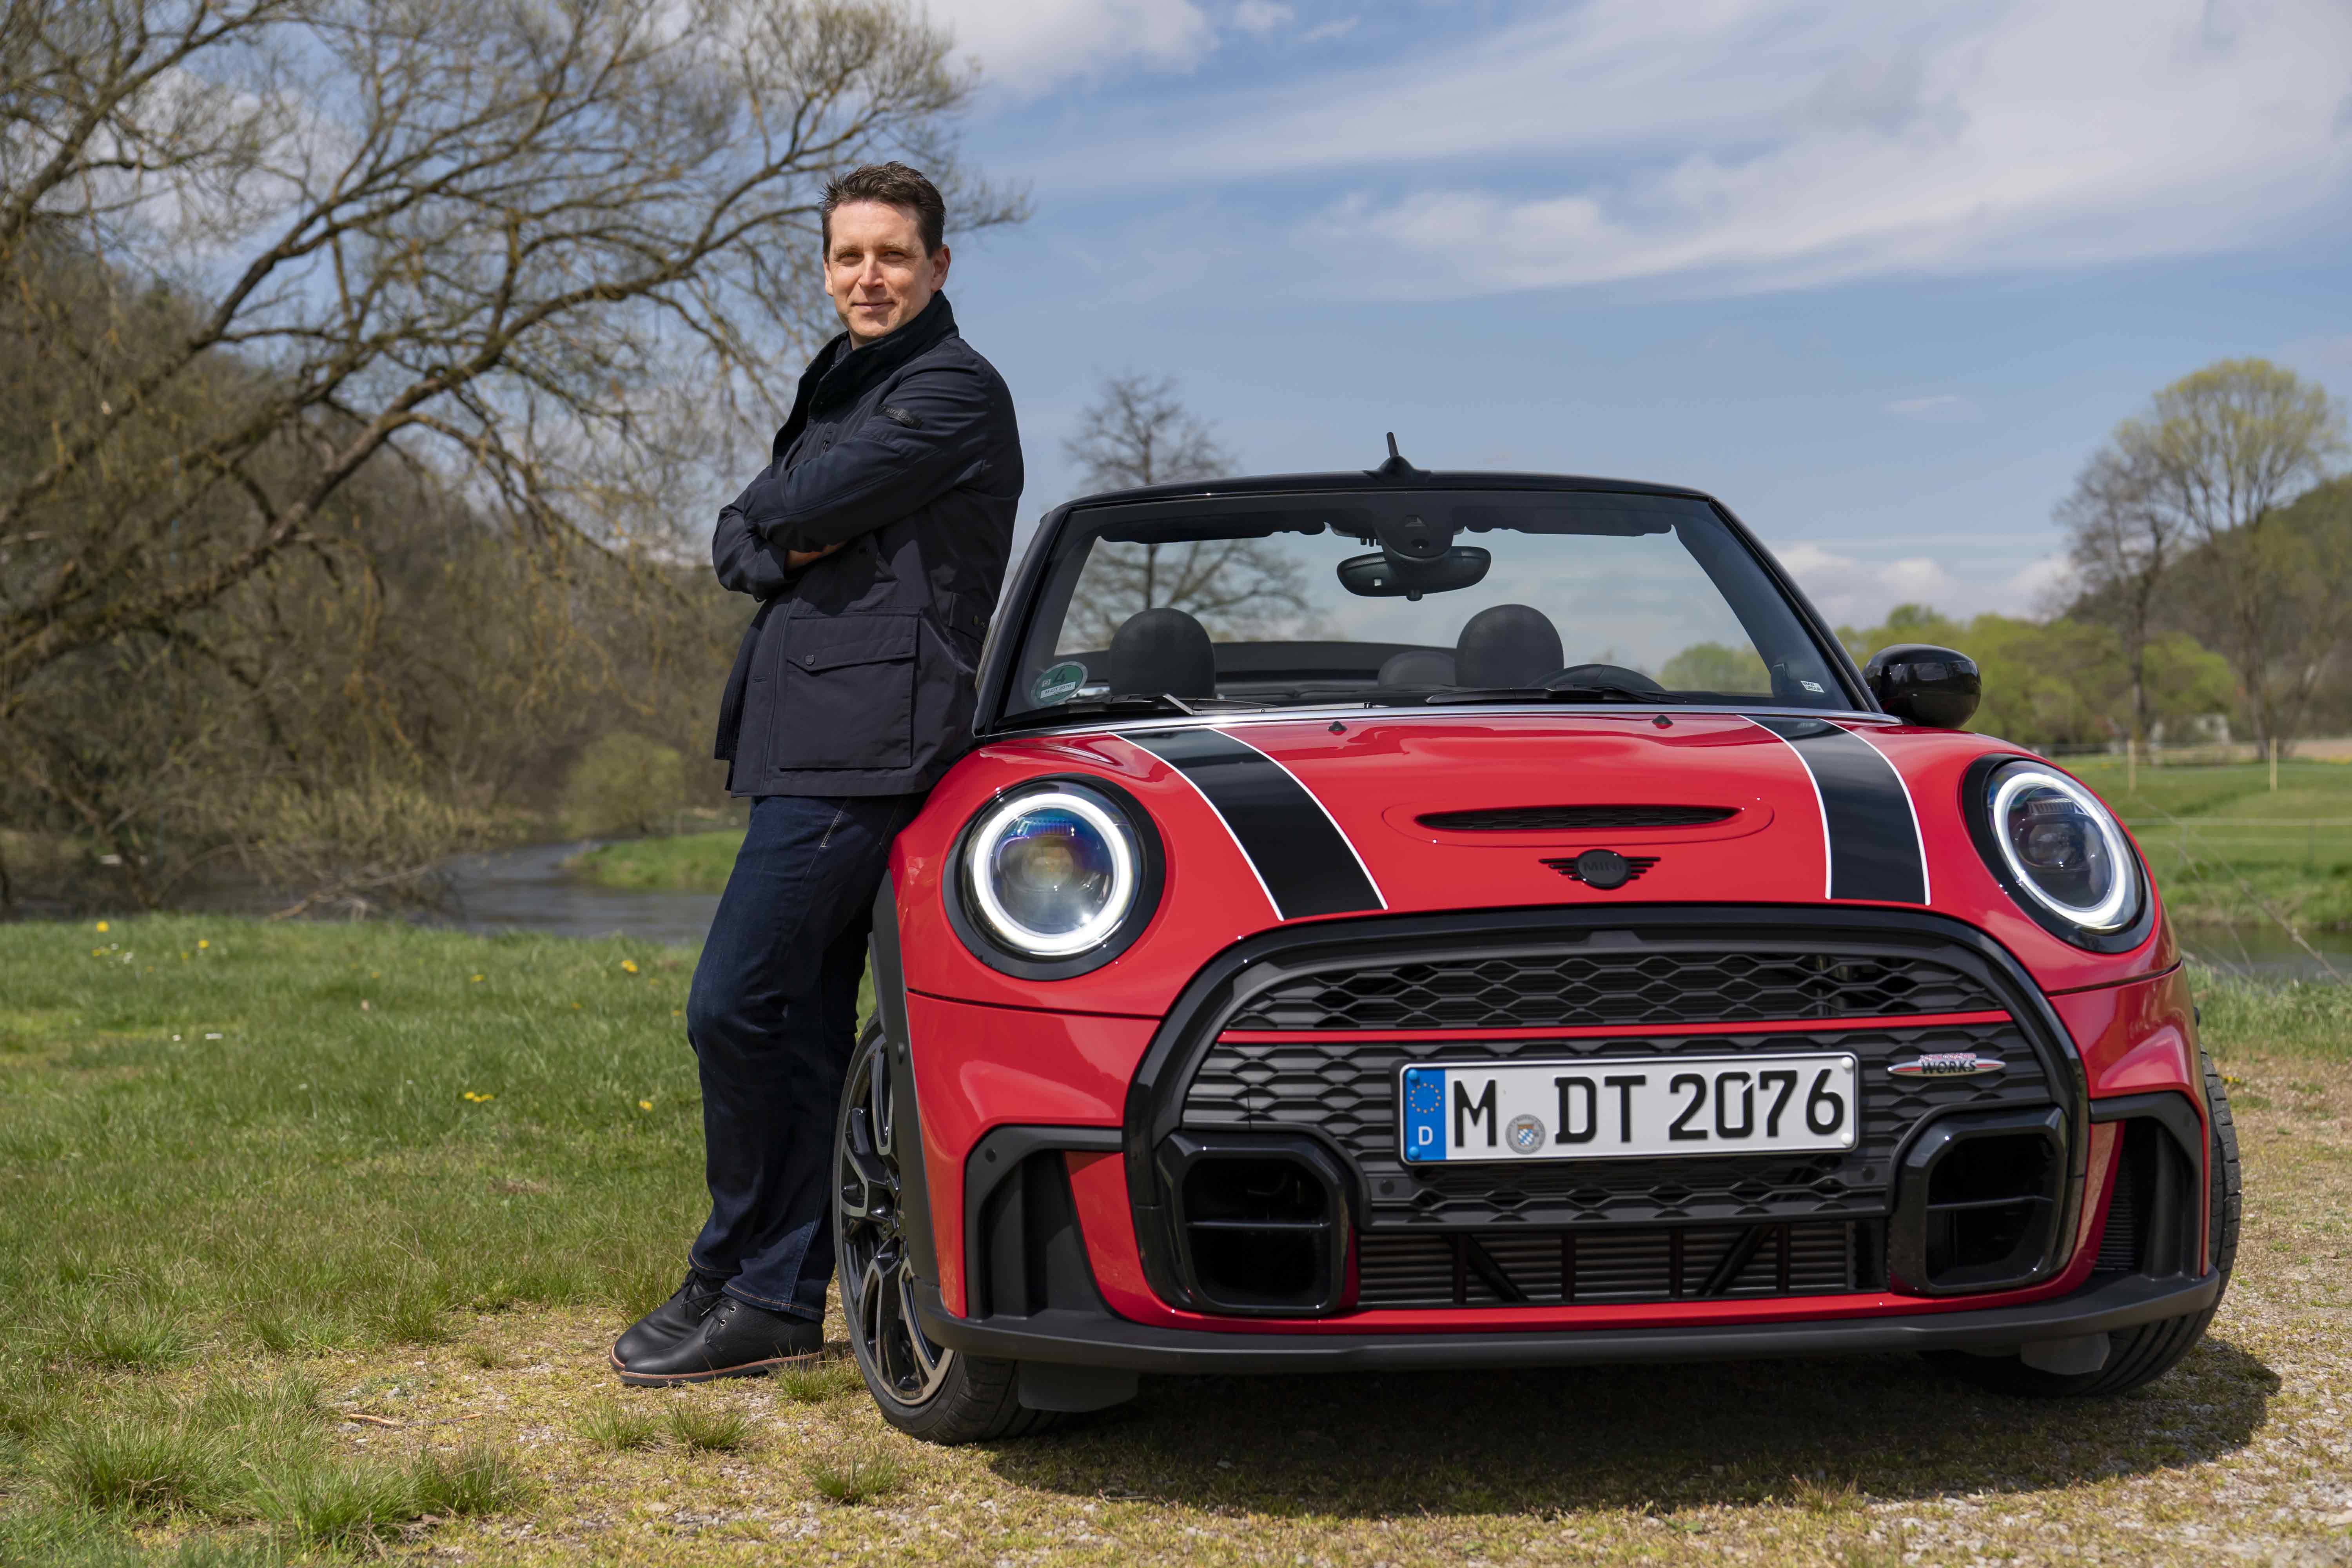 The mini convertible the future is ready for it.